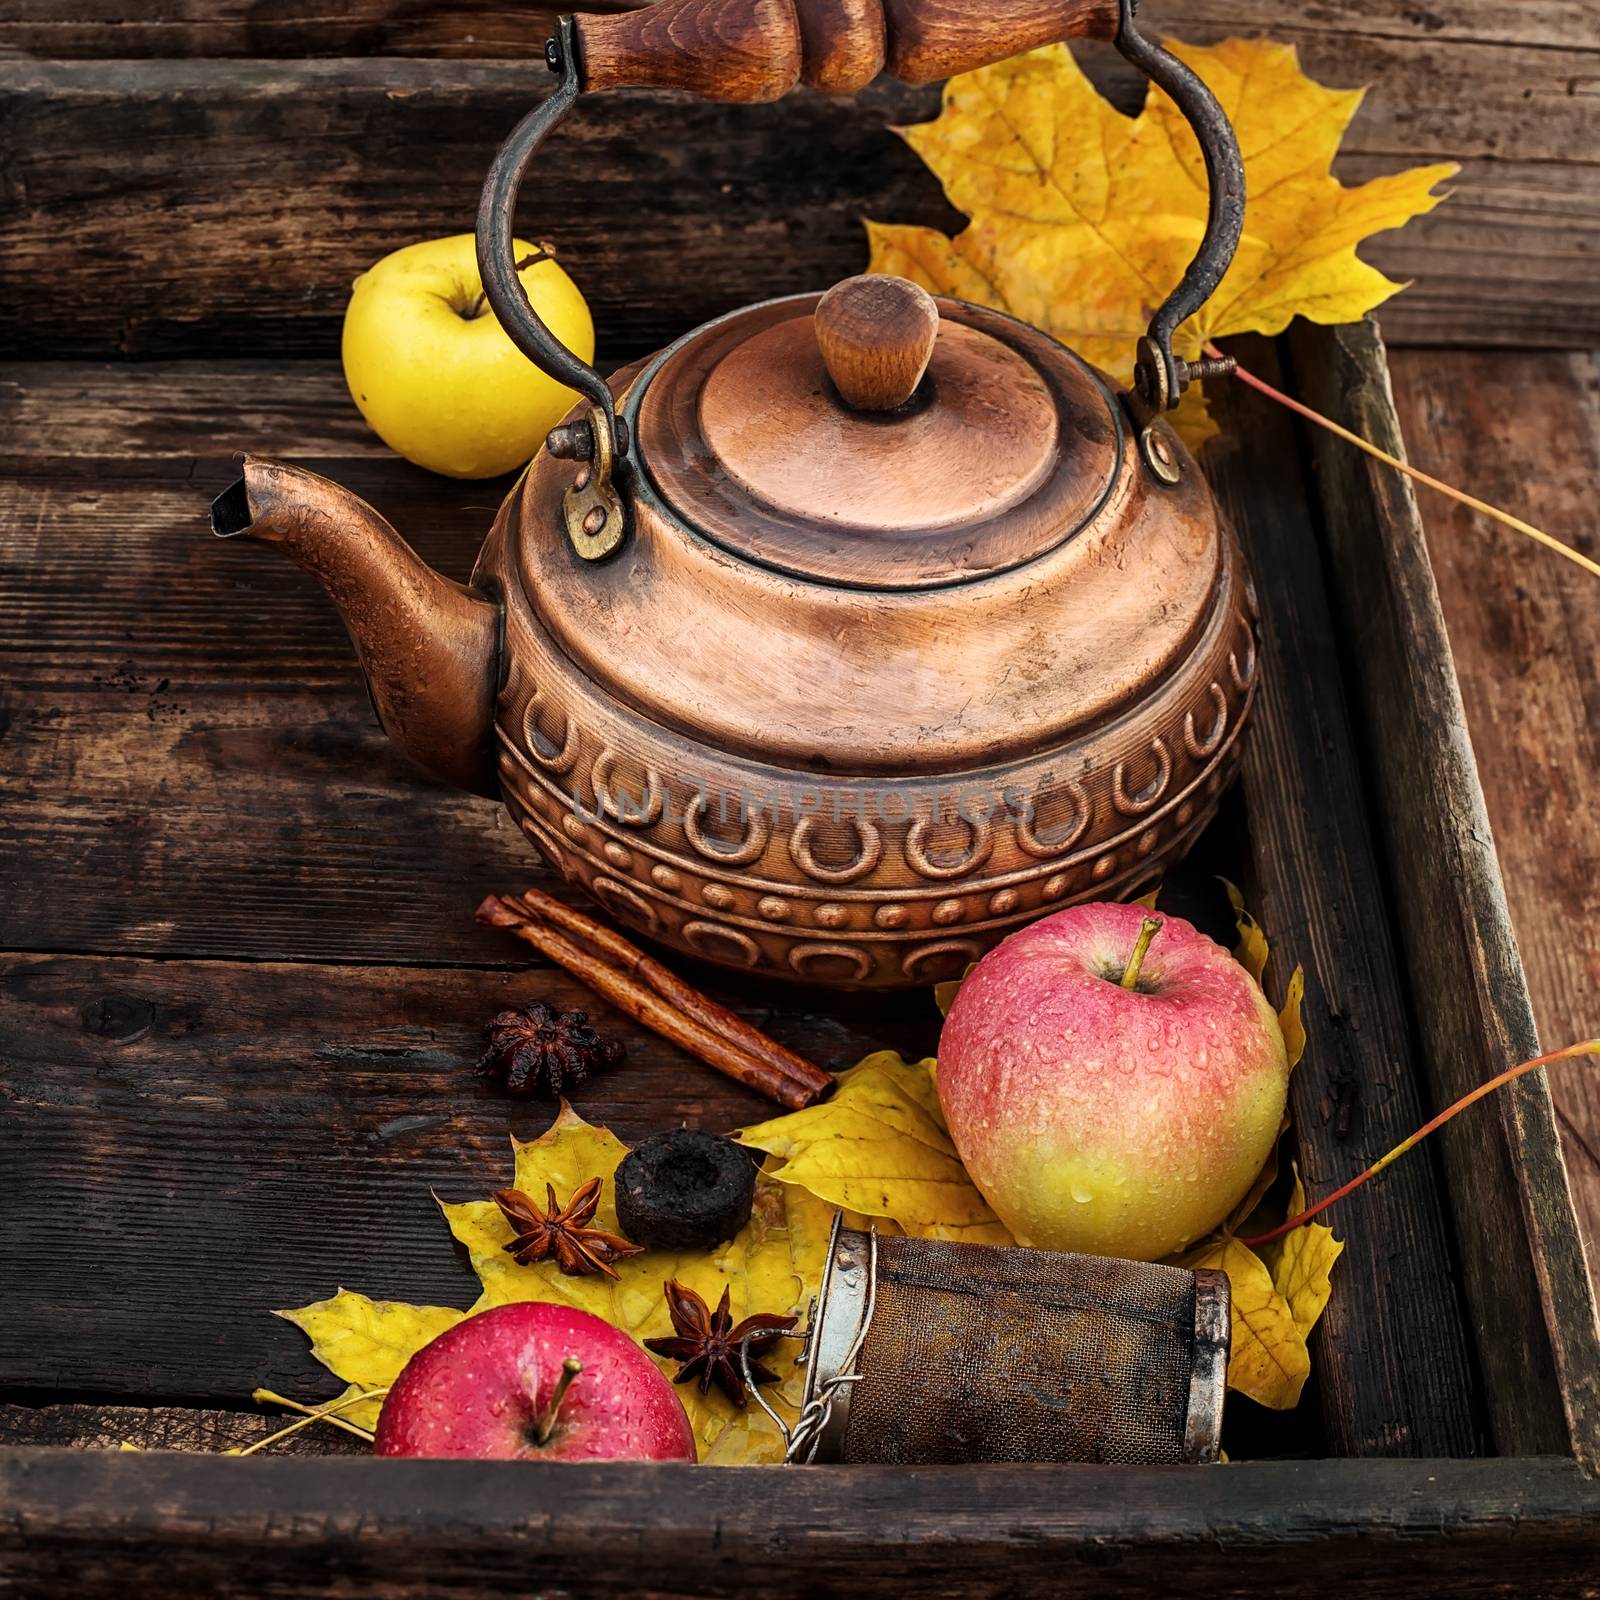 Stylish teapot,apples and maple leaf in rustic style